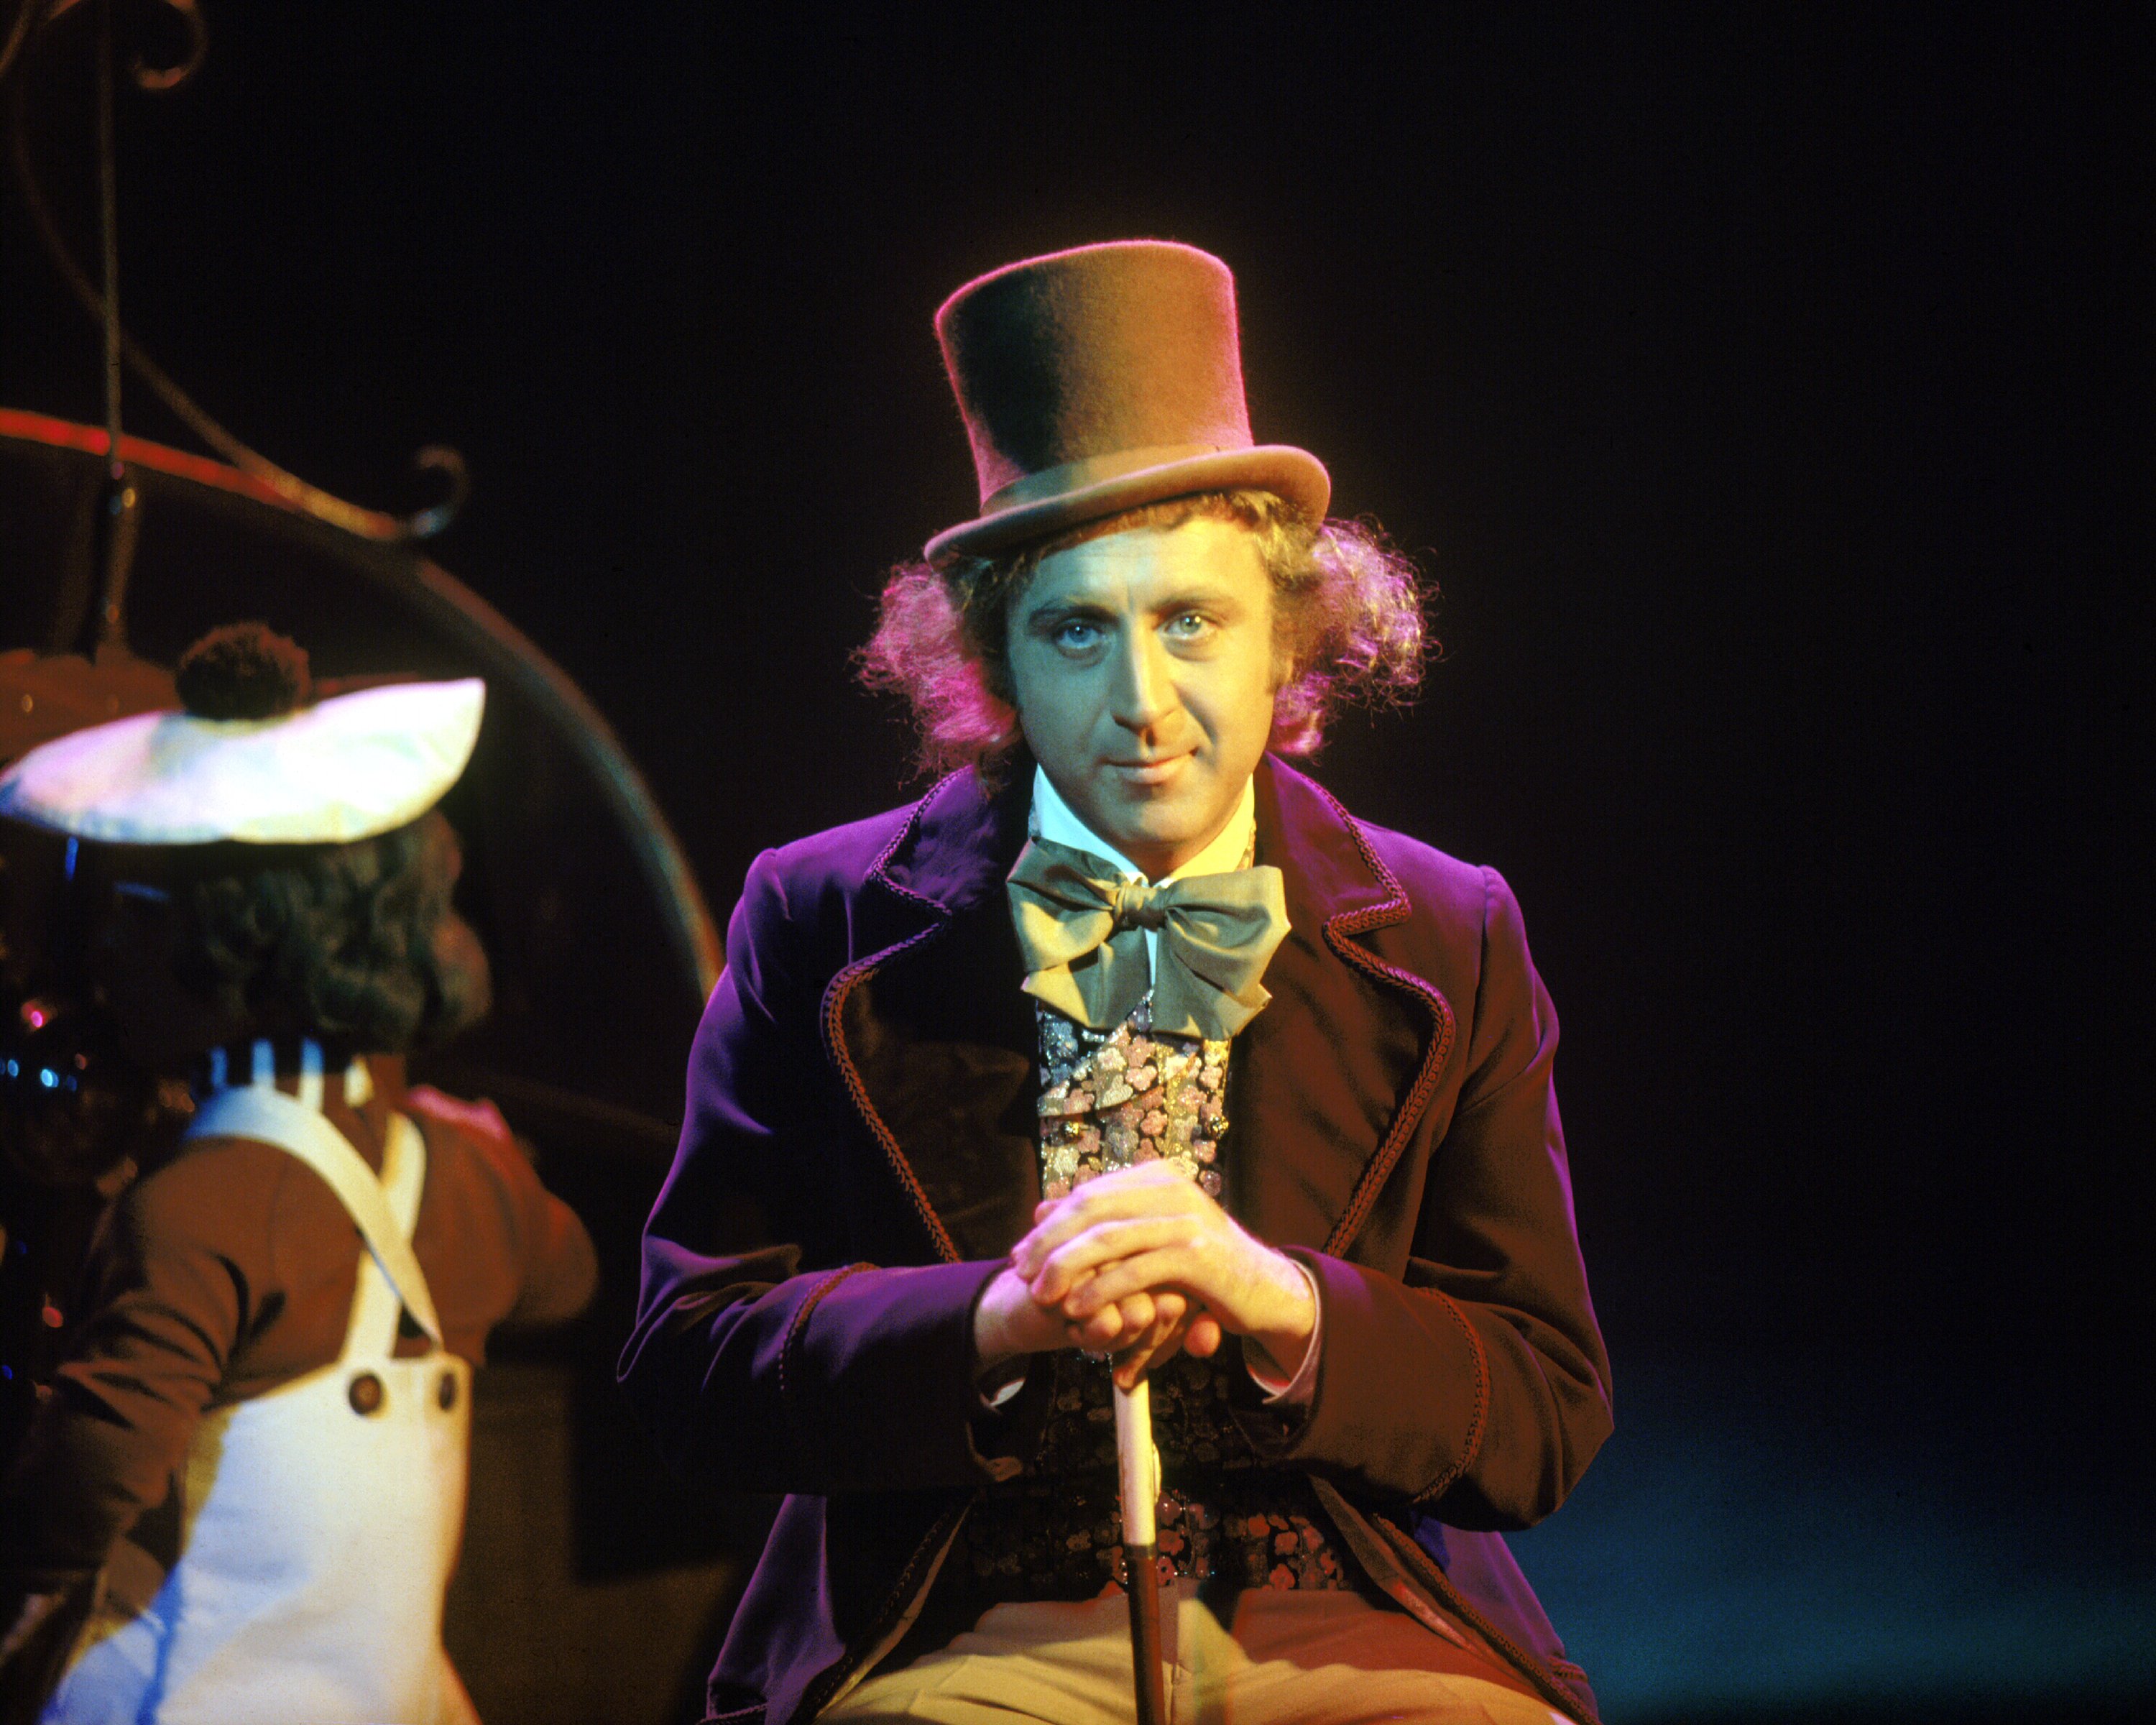 Gene Wilder as Willy Wonka on the set of the 1974 fantasy film "Willy Wonka & the Chocolate Factory." | Source: Getty Images